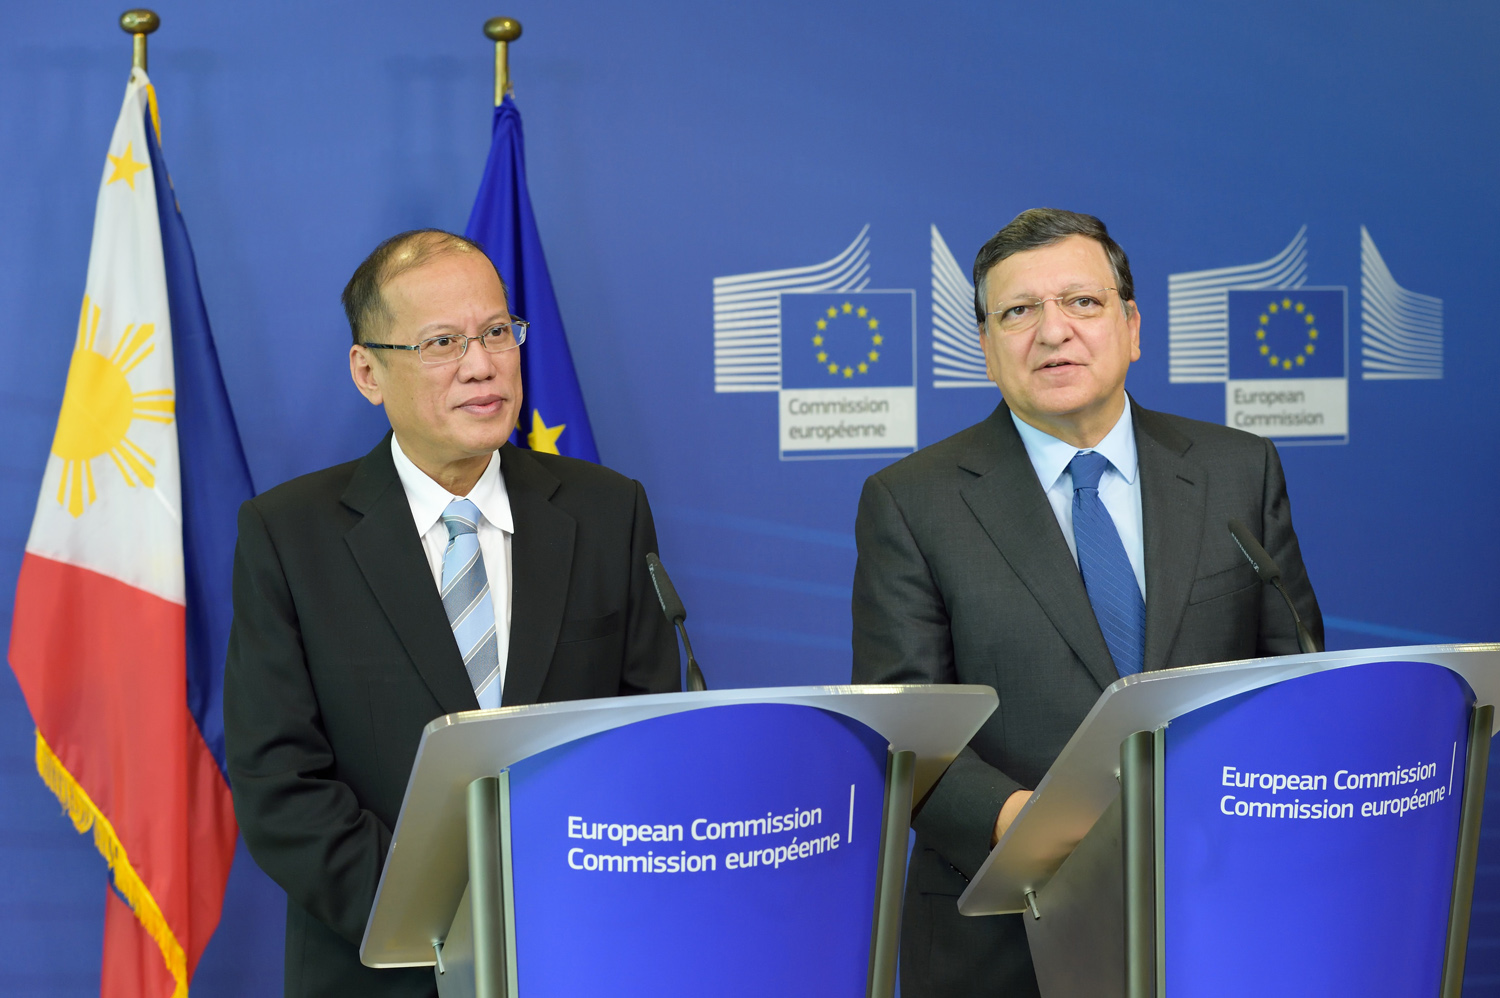 European Commission President Jose Barroso Monday with the President of Philippines Benigno Aquino III during the press conference